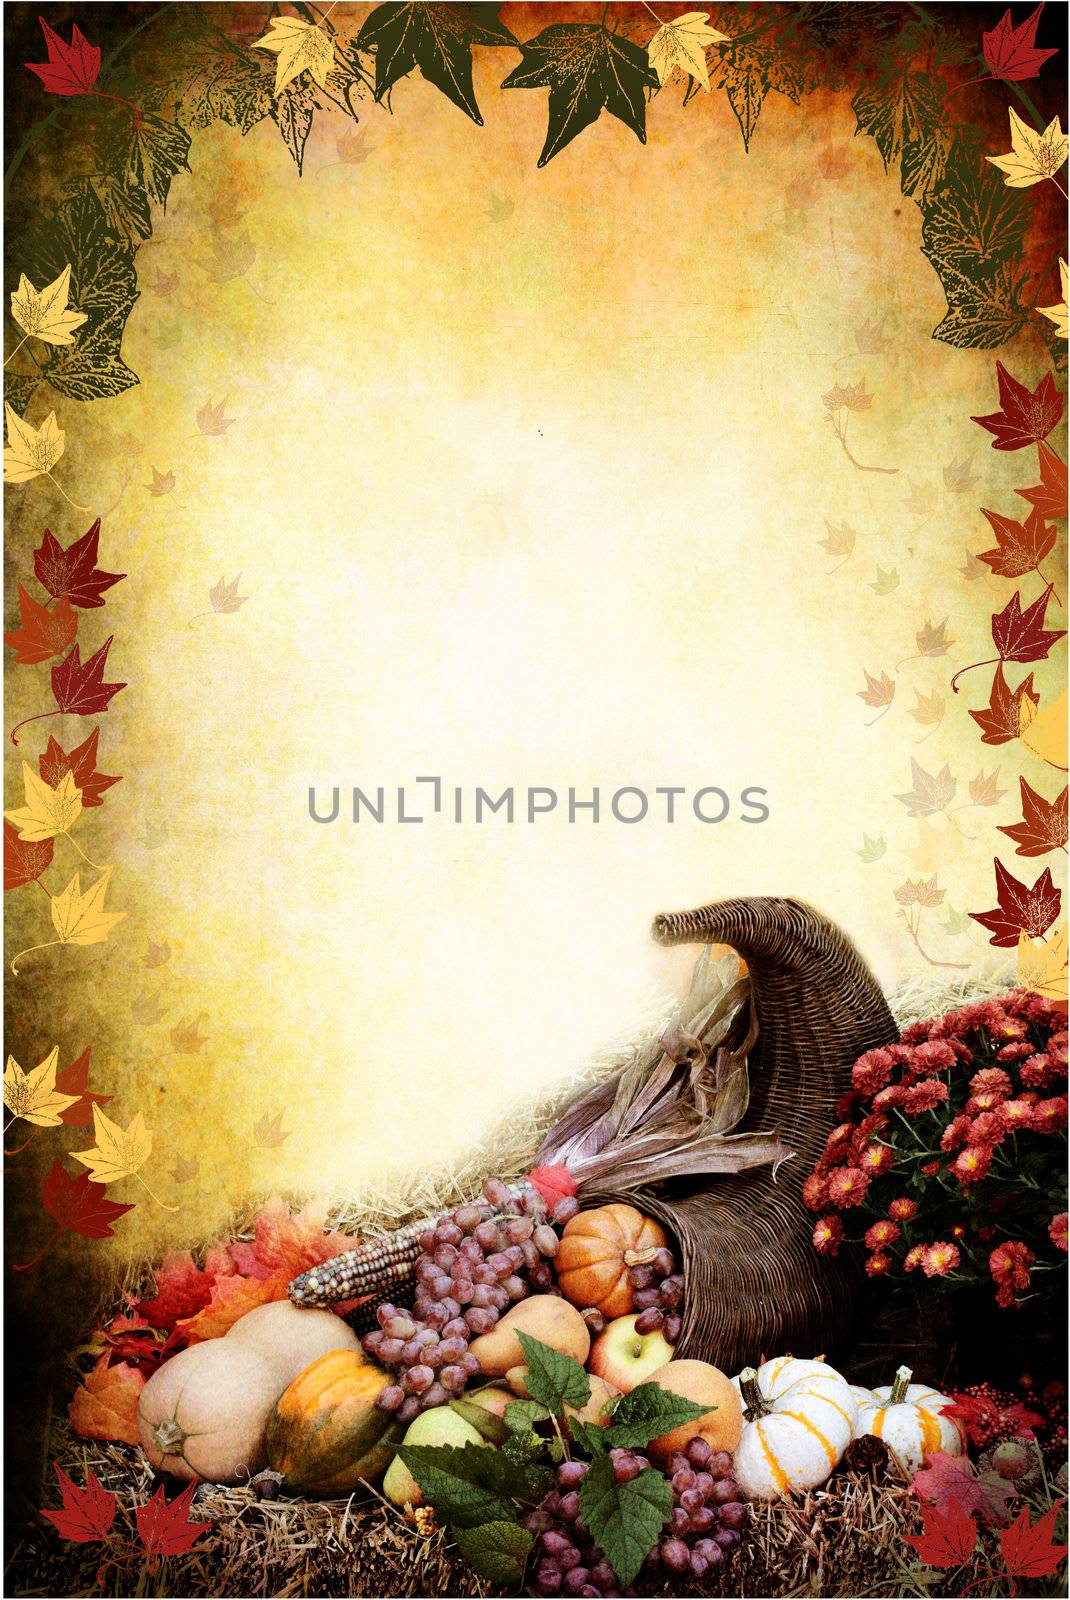 Photo based illustration of an autumn background with a Cornucopia or Horn of Plenty on bales of straw with fresh vegetables and fruit spilling out. Empty copy space for text.